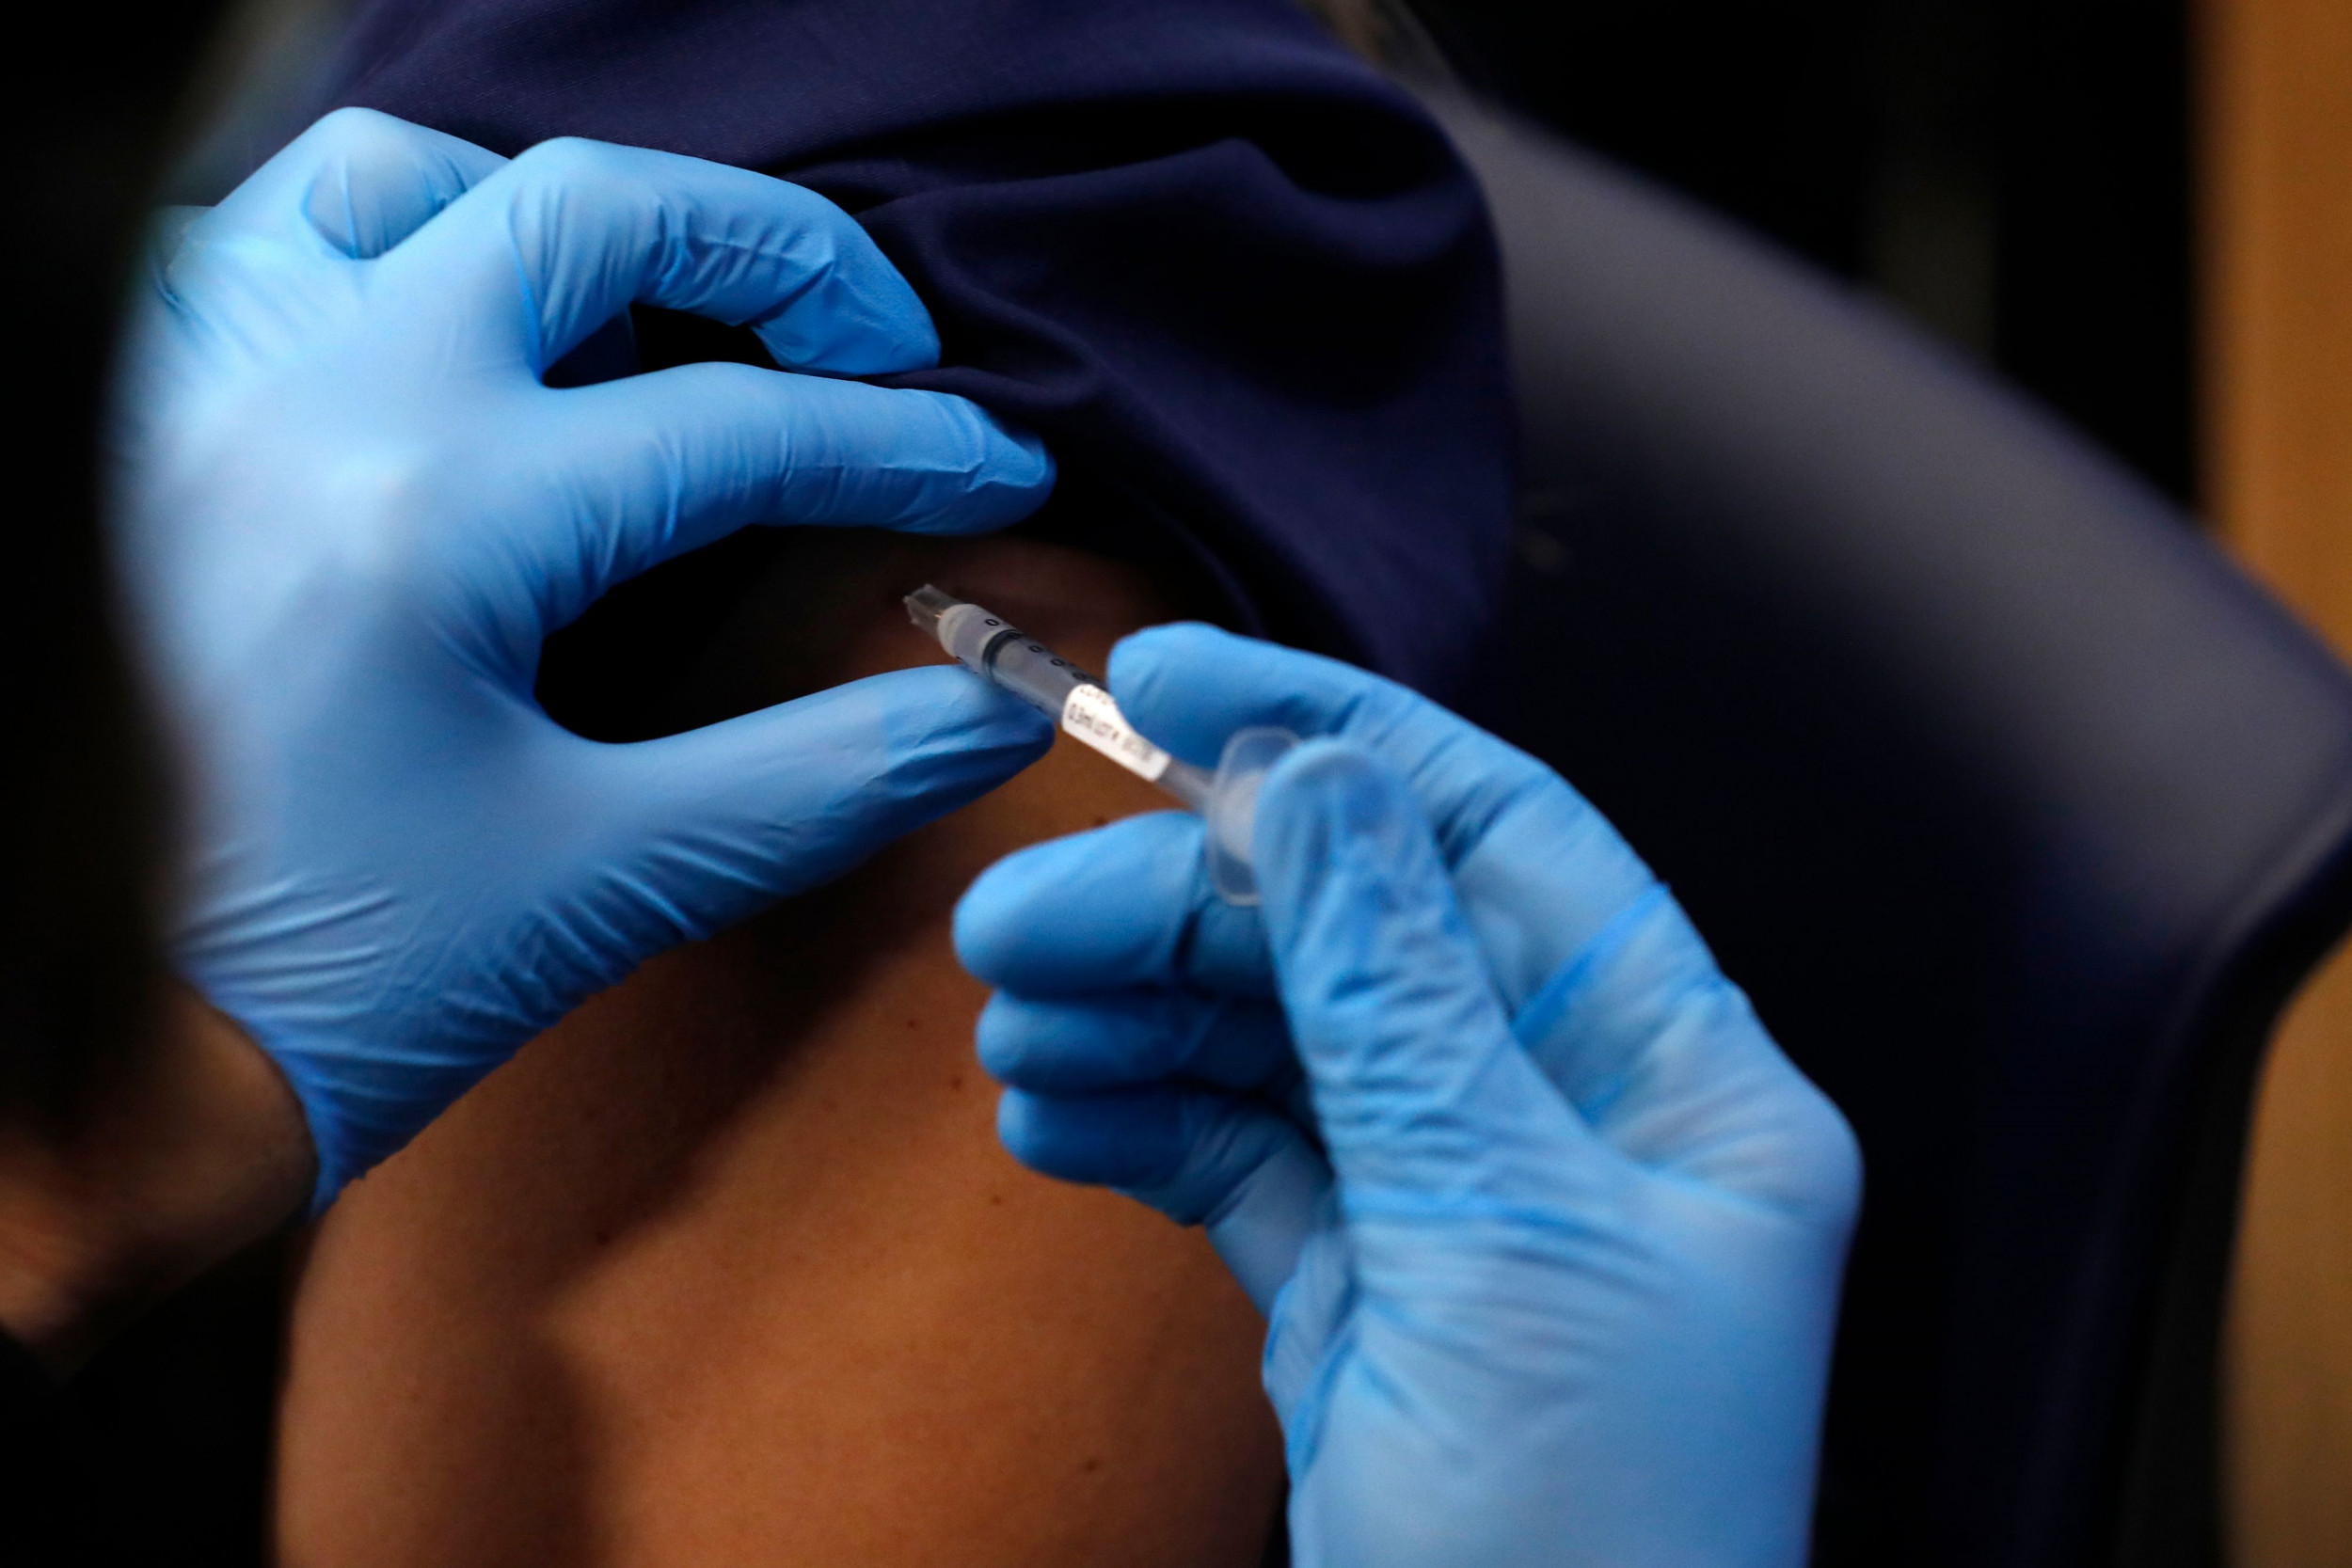 Michigan, Alaska to give COVID vaccines to all adults well ahead of Biden’s May 1 pledge